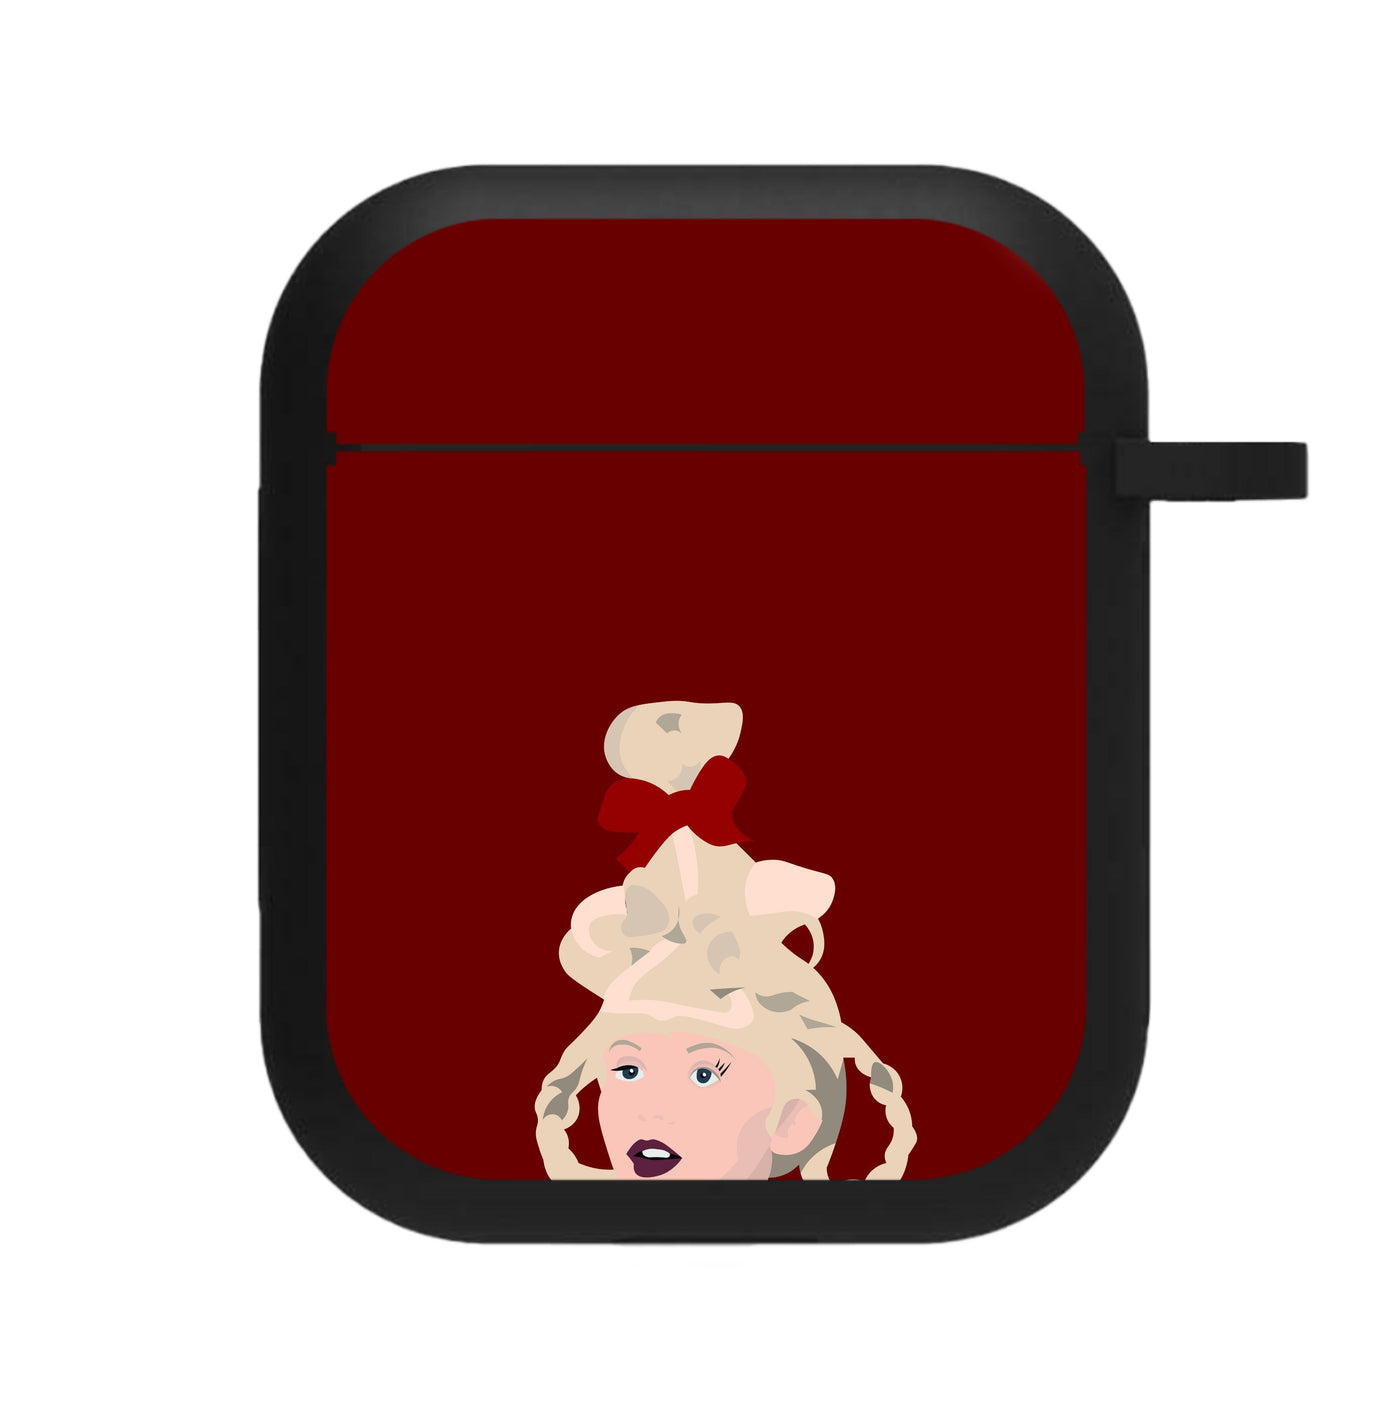 Cindy Lou Who - Grinch AirPods Case